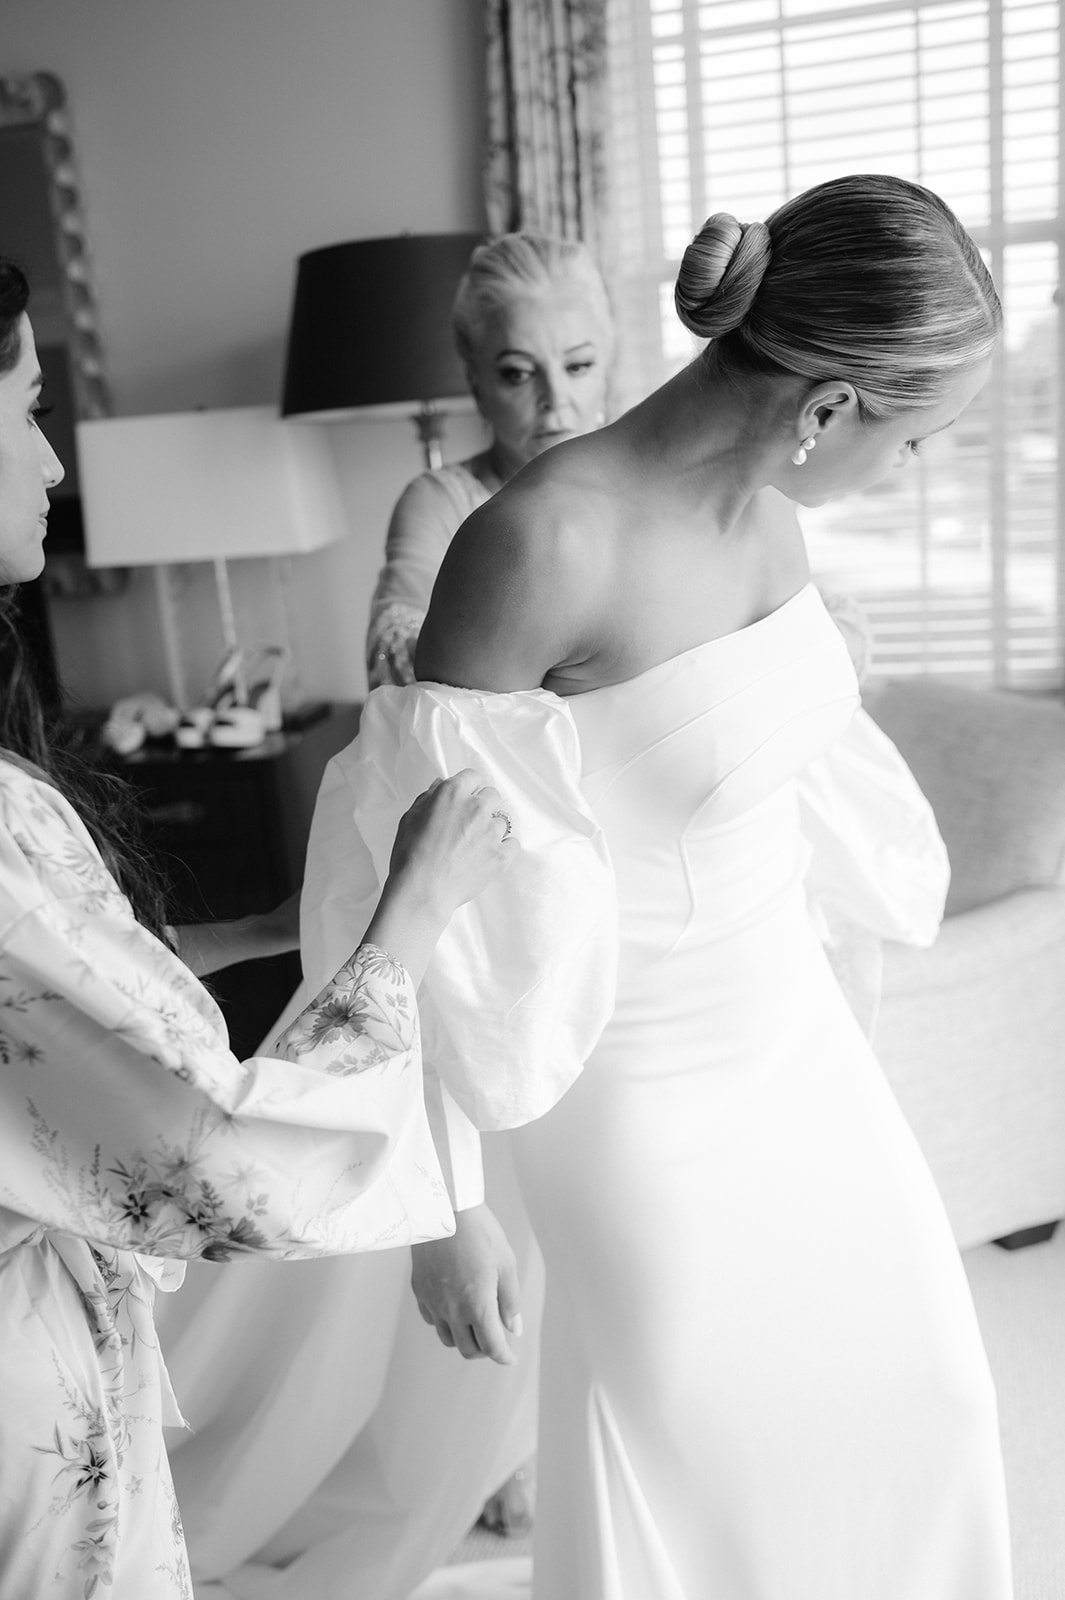 A bride putting her wedding dress on in an Ocean House suite in Rhode Island.